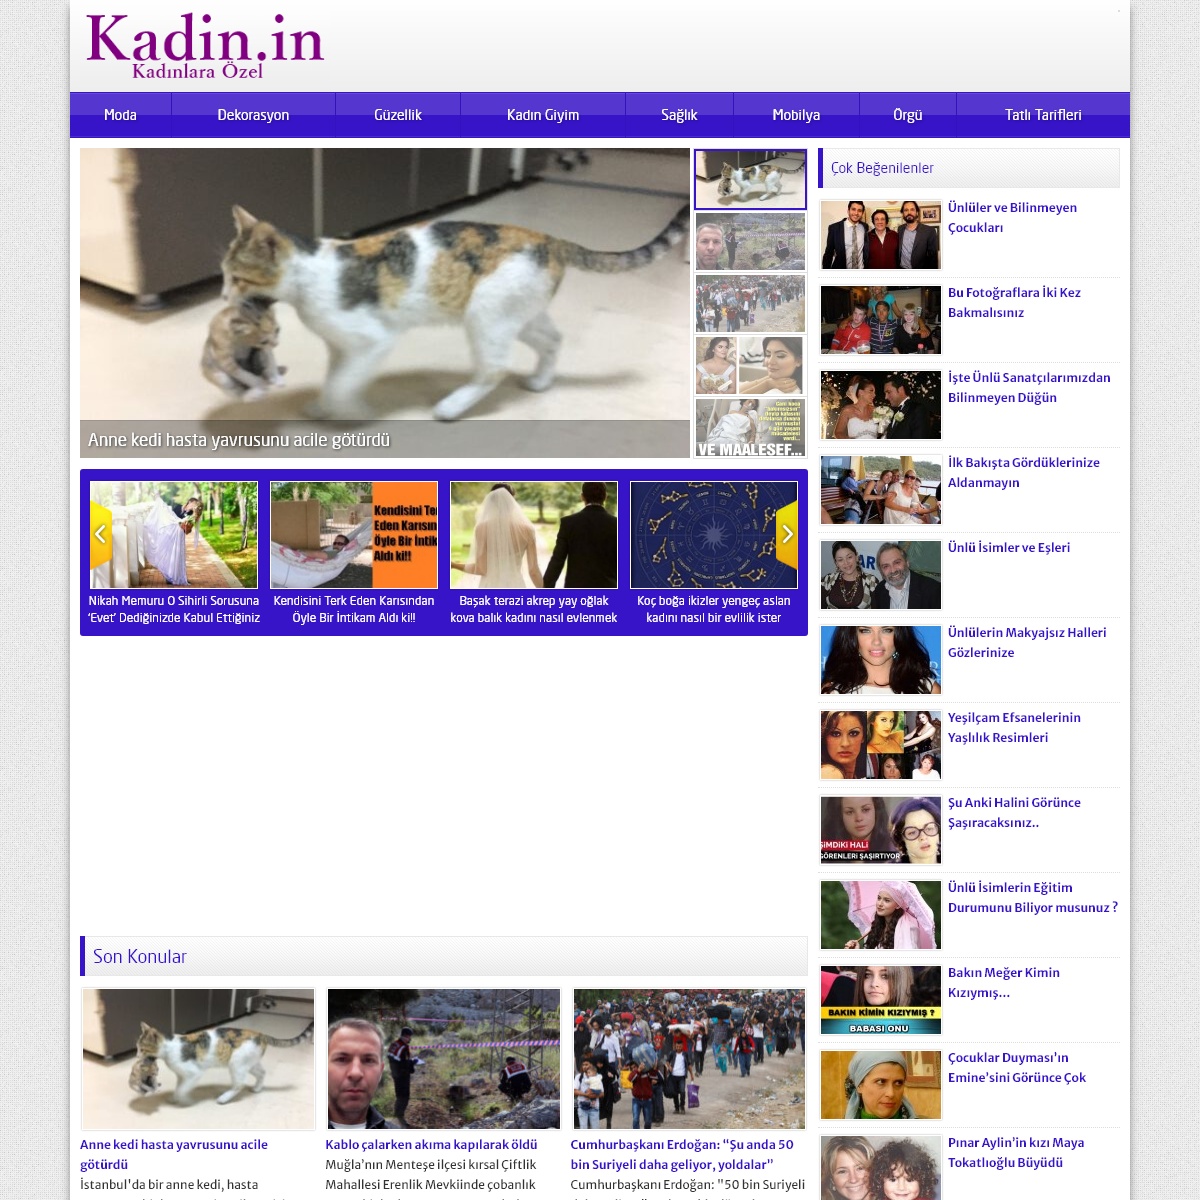 A complete backup of kadin.in